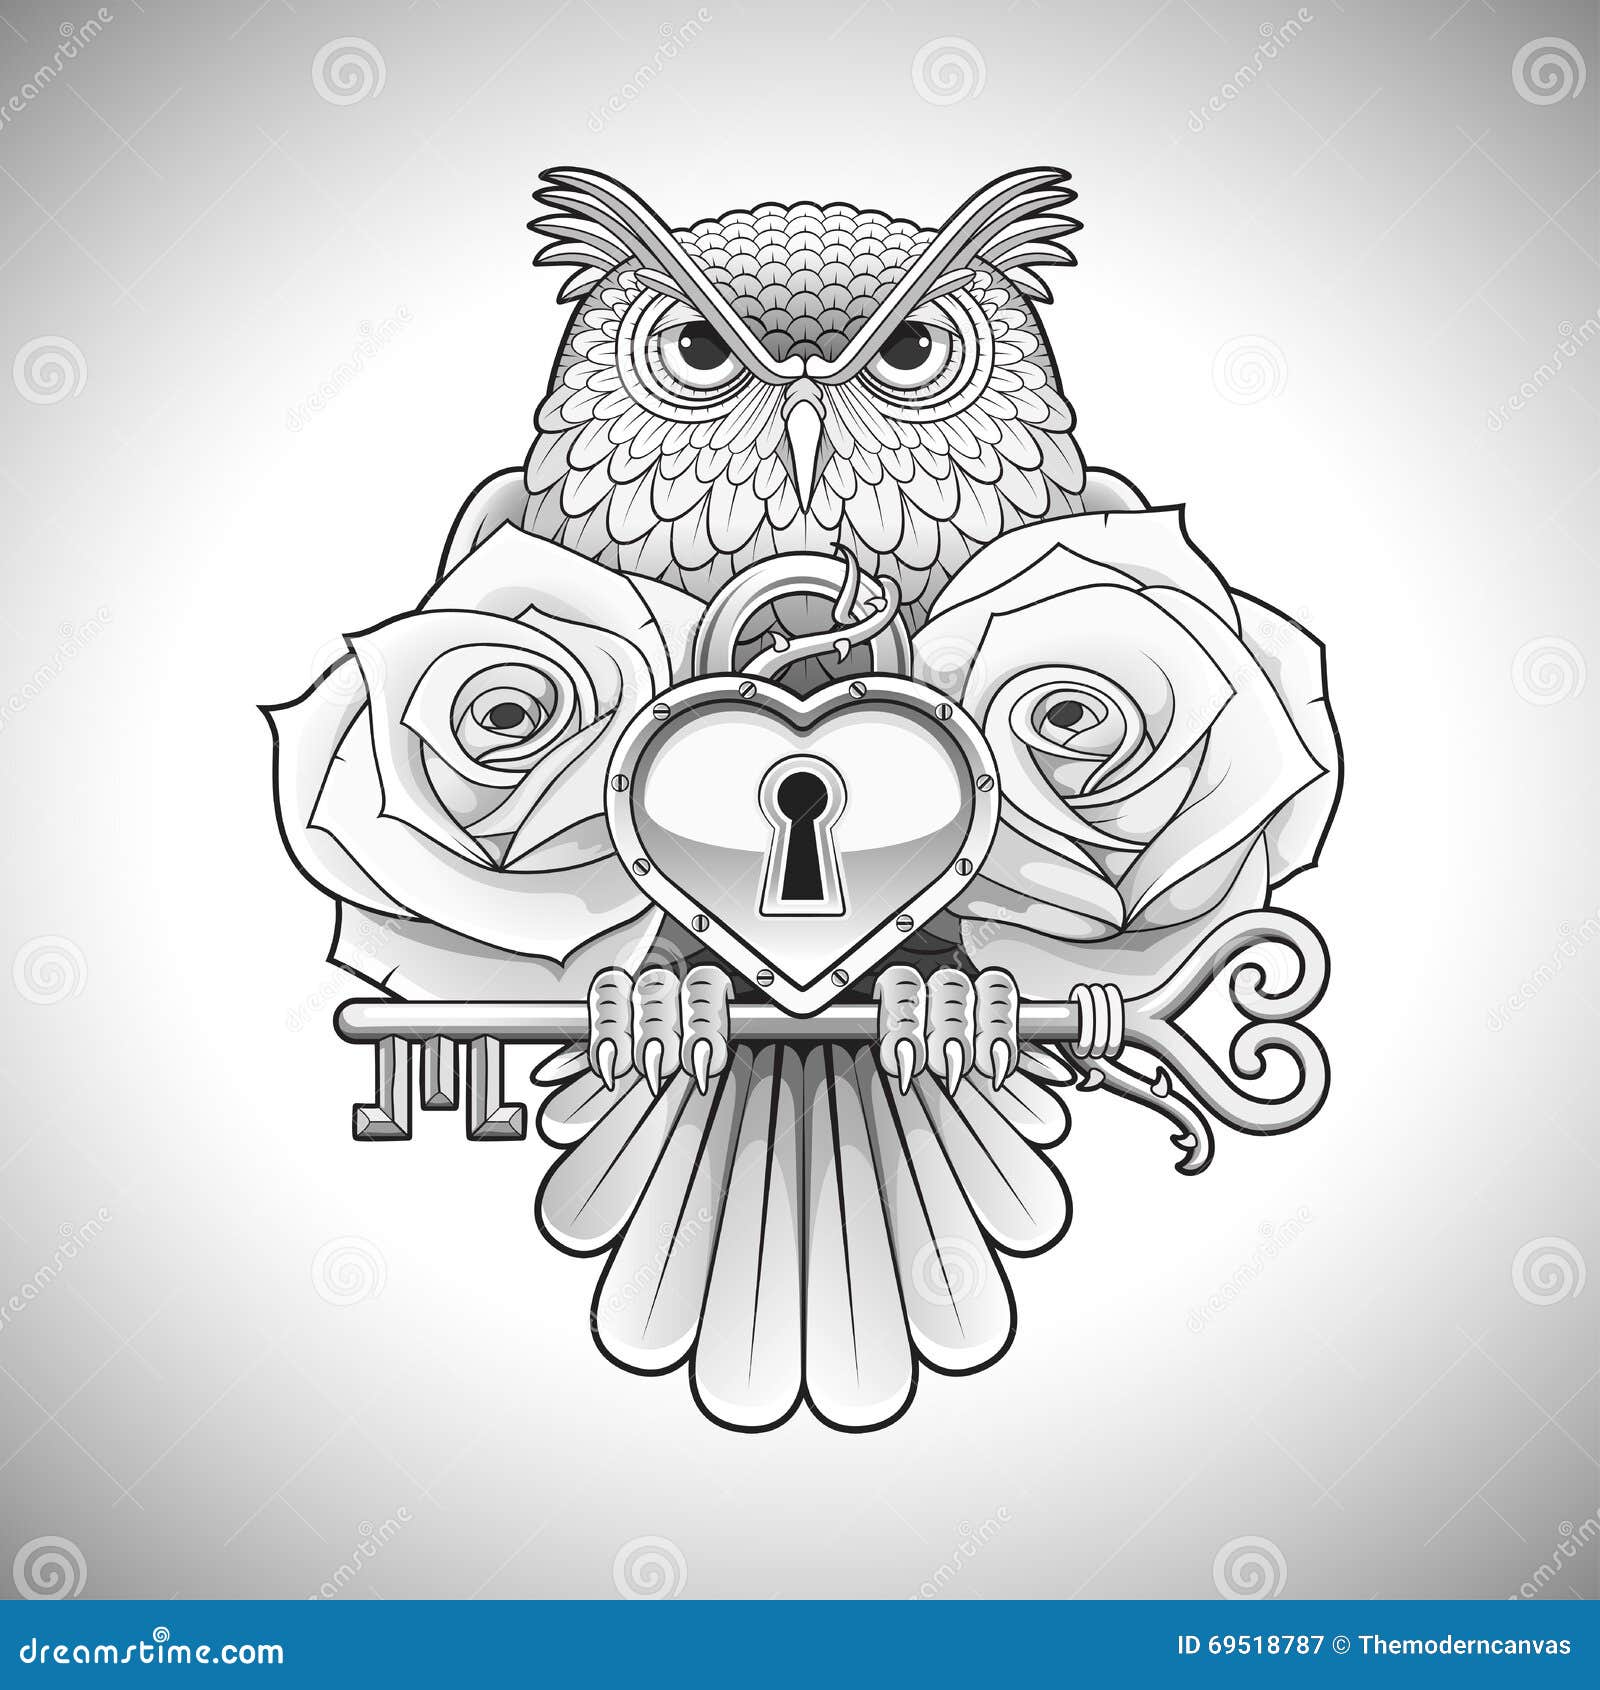 Beautiful Black Tattoo Design of an Owl Holding a Key with a Heart Locket  and Roses Stock Vector - Illustration of concept, ornate: 69518787